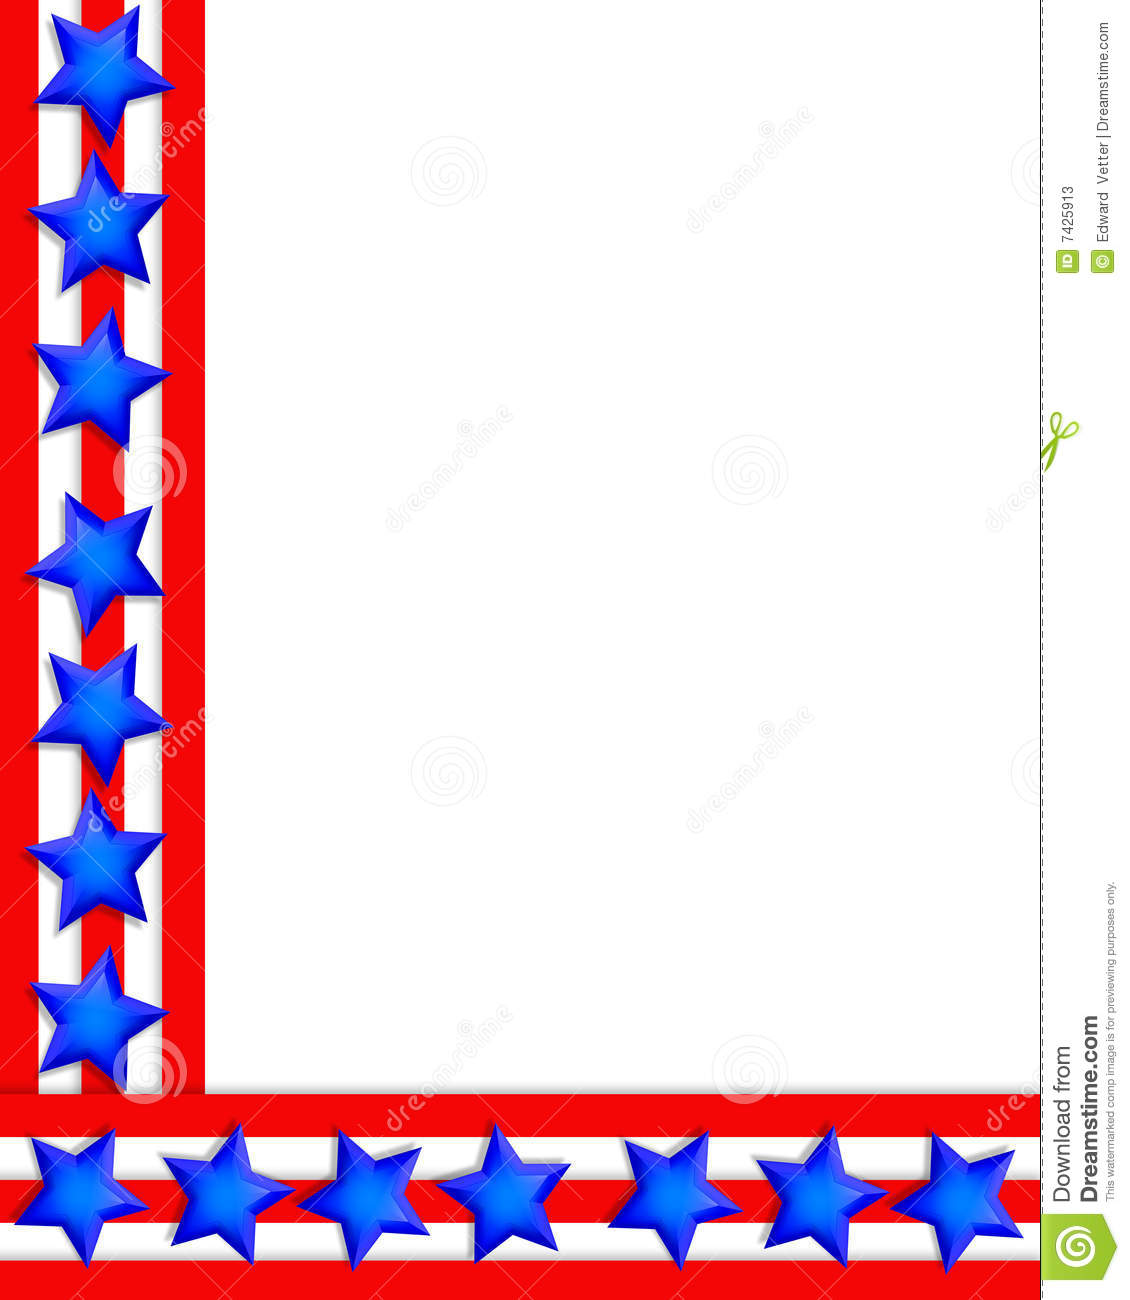 Fireworks Border   Clipart Panda   Free Clipart Images